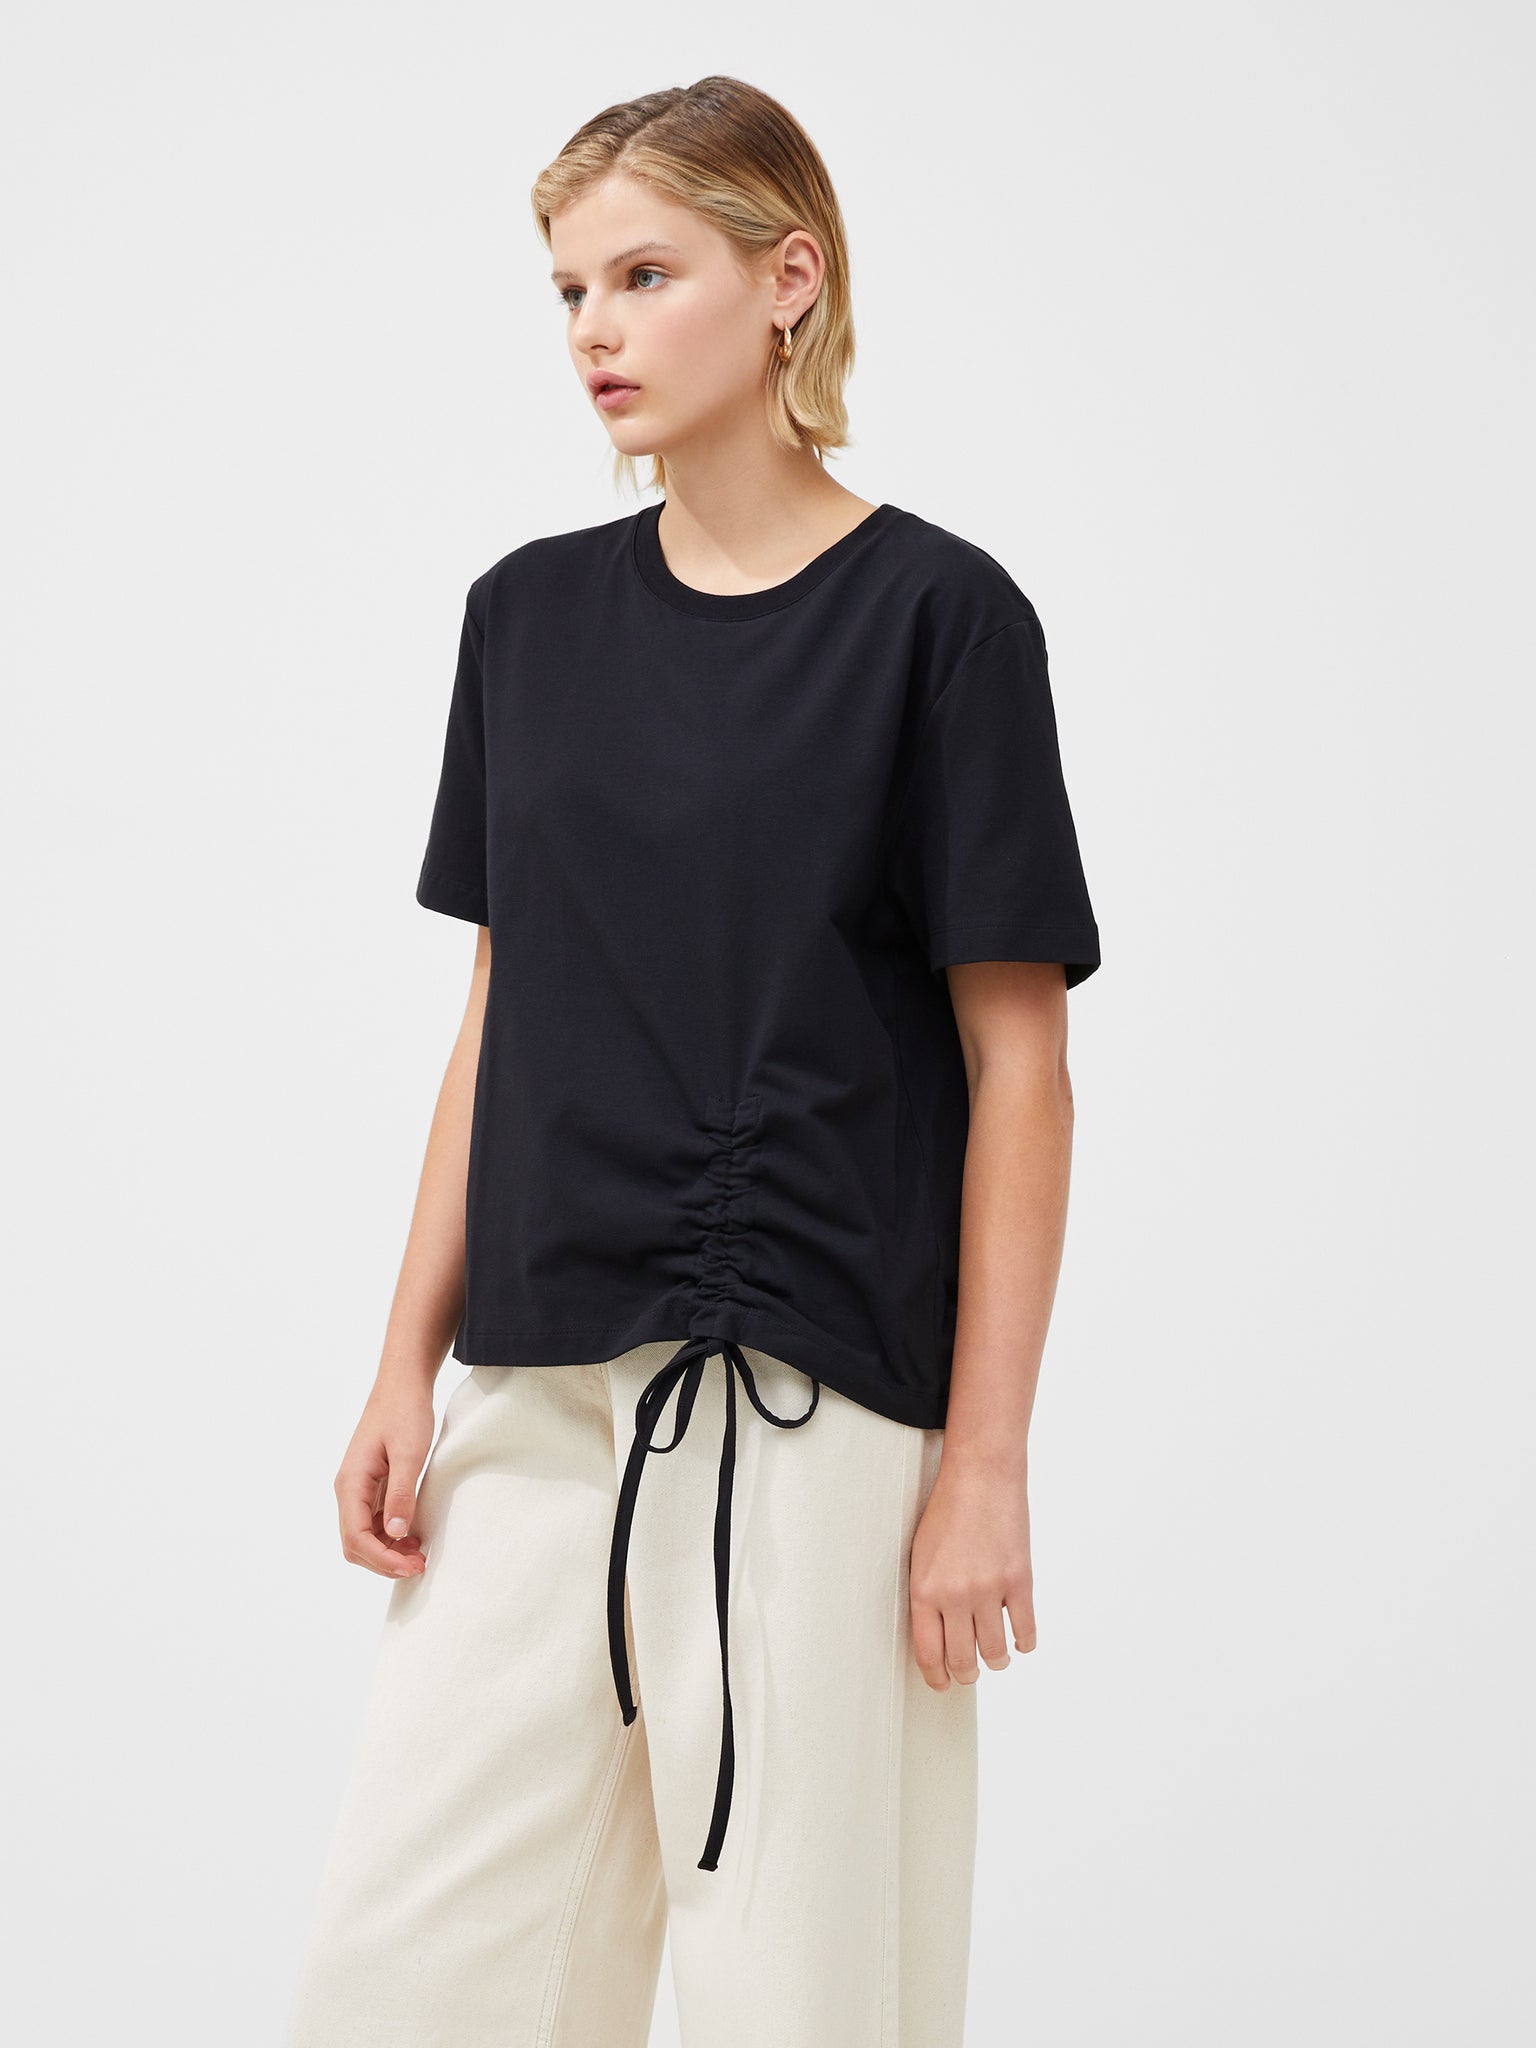 French Connection Rallie Cotton Rouched T-Shirt in Black